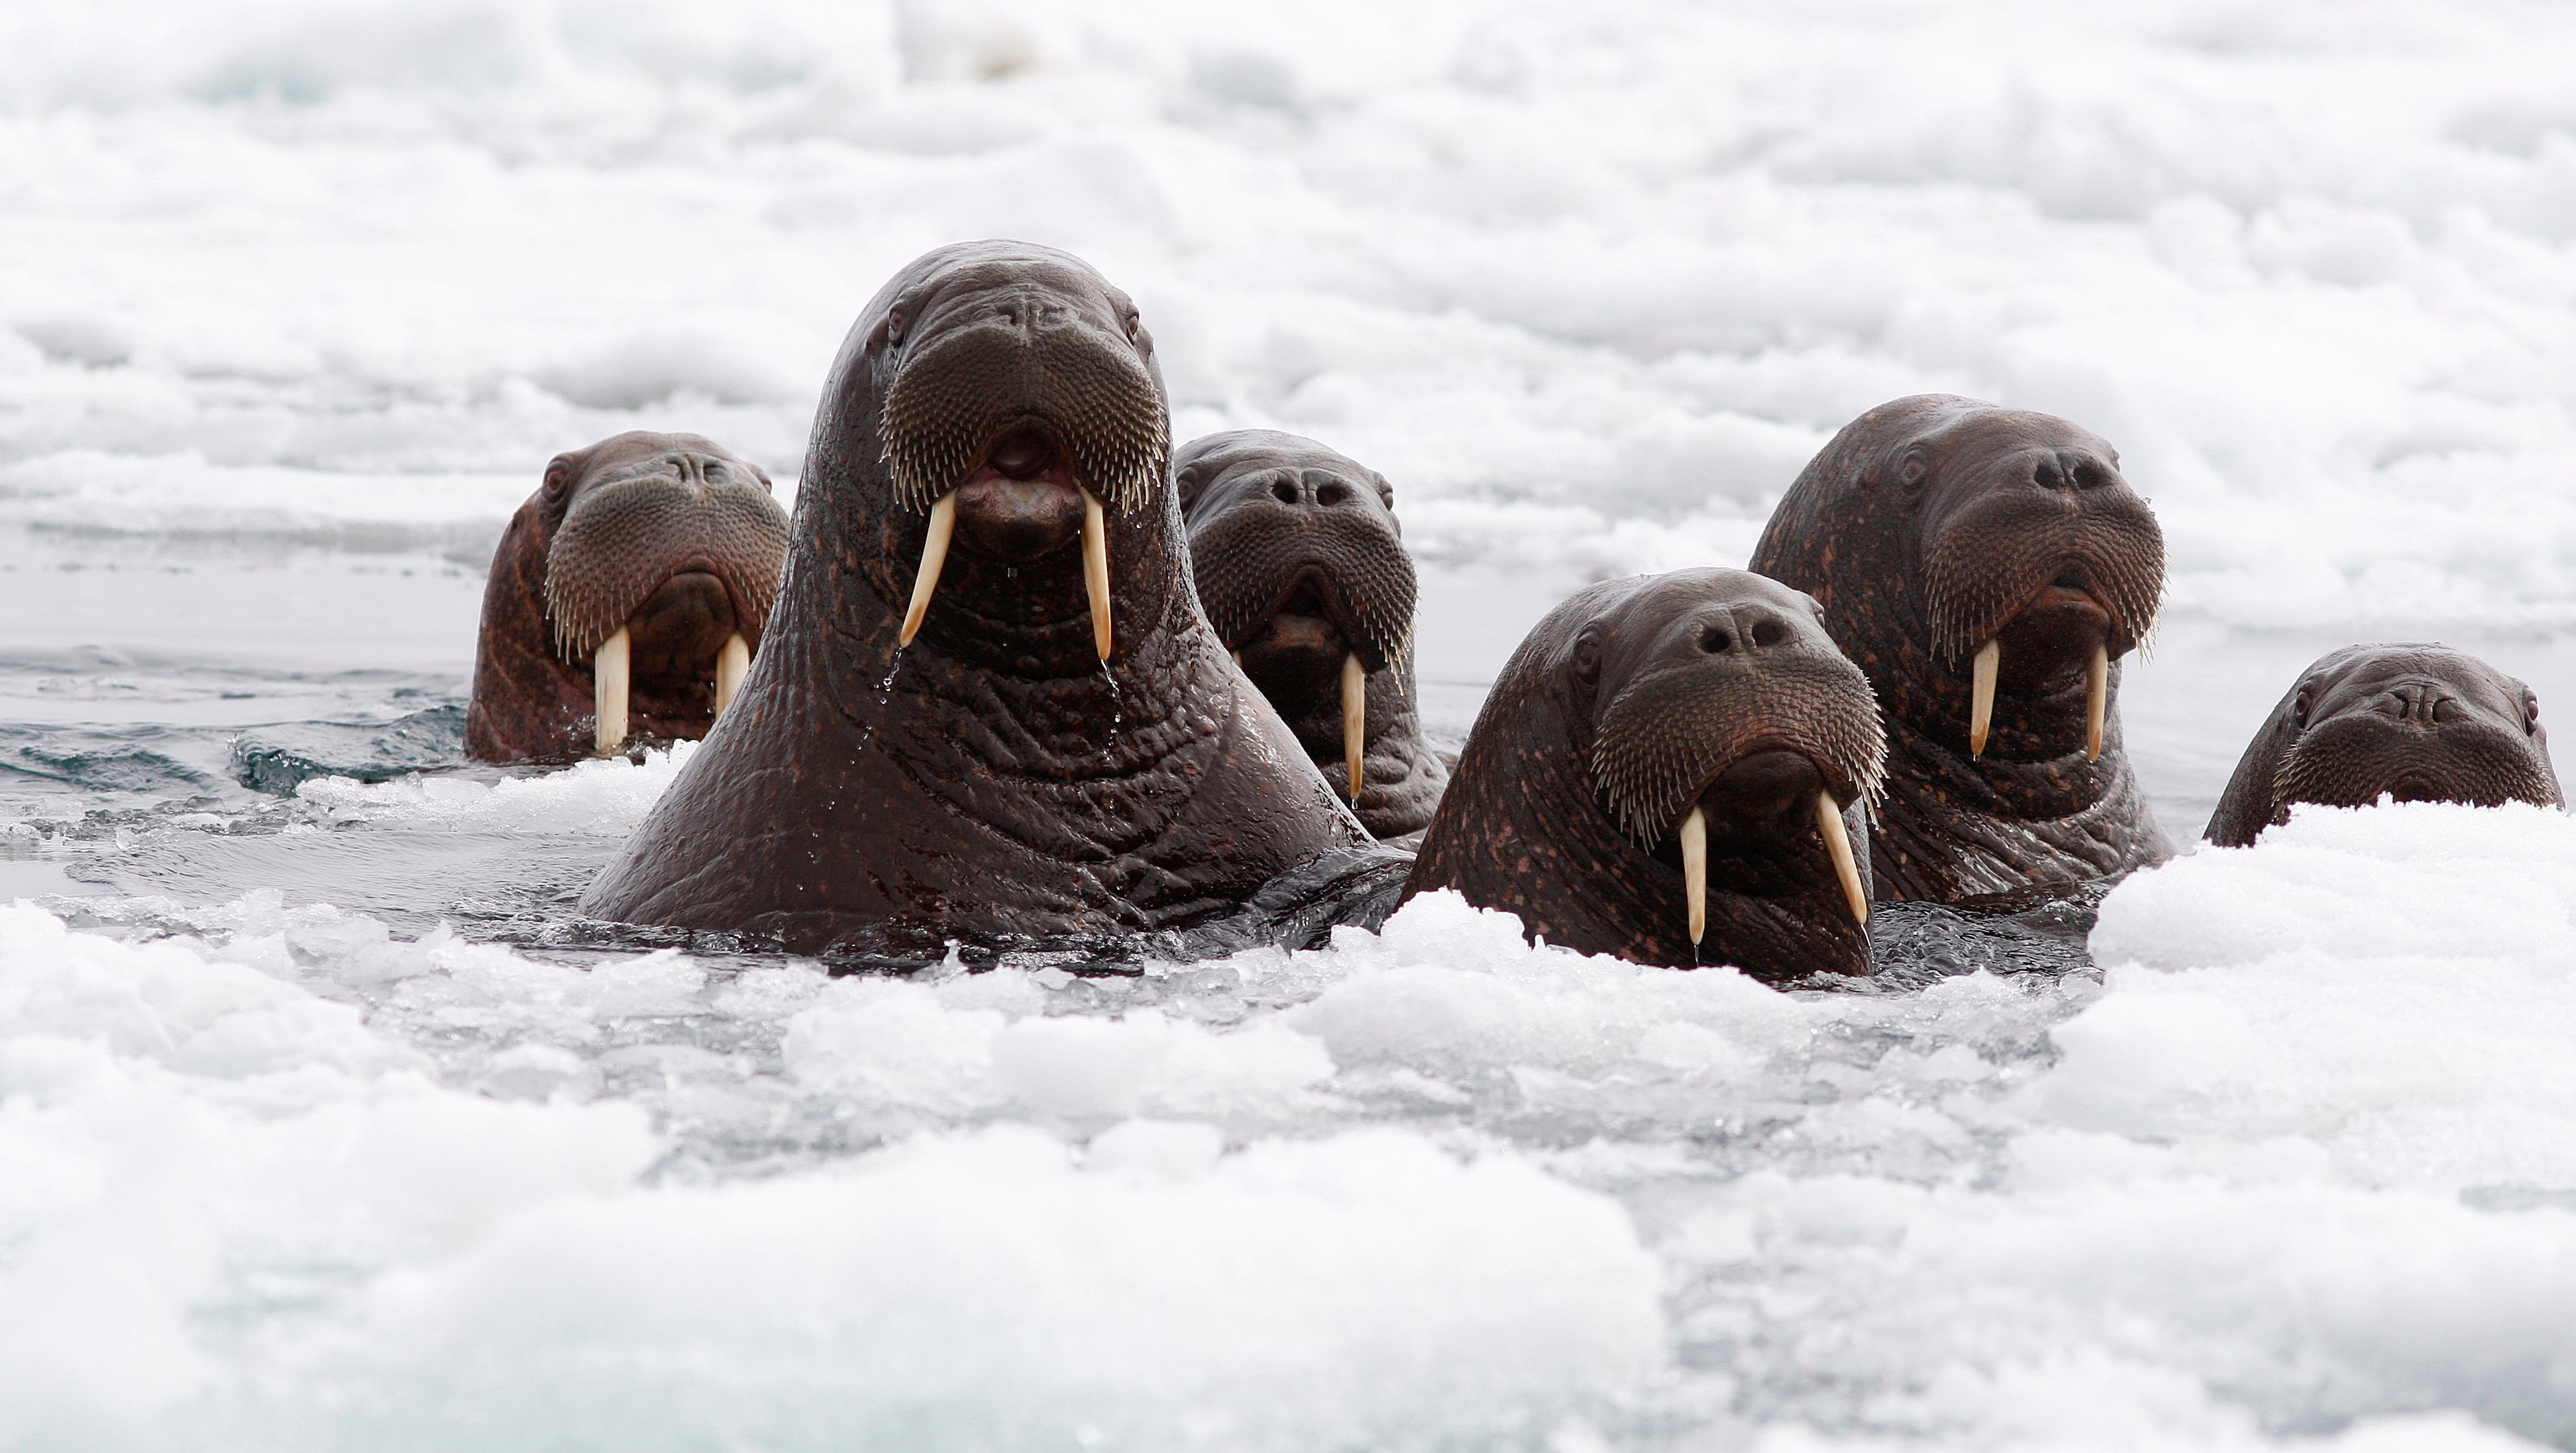 Sign of warming: 35K walruses &#39;haul out&#39; on Alaskan shore